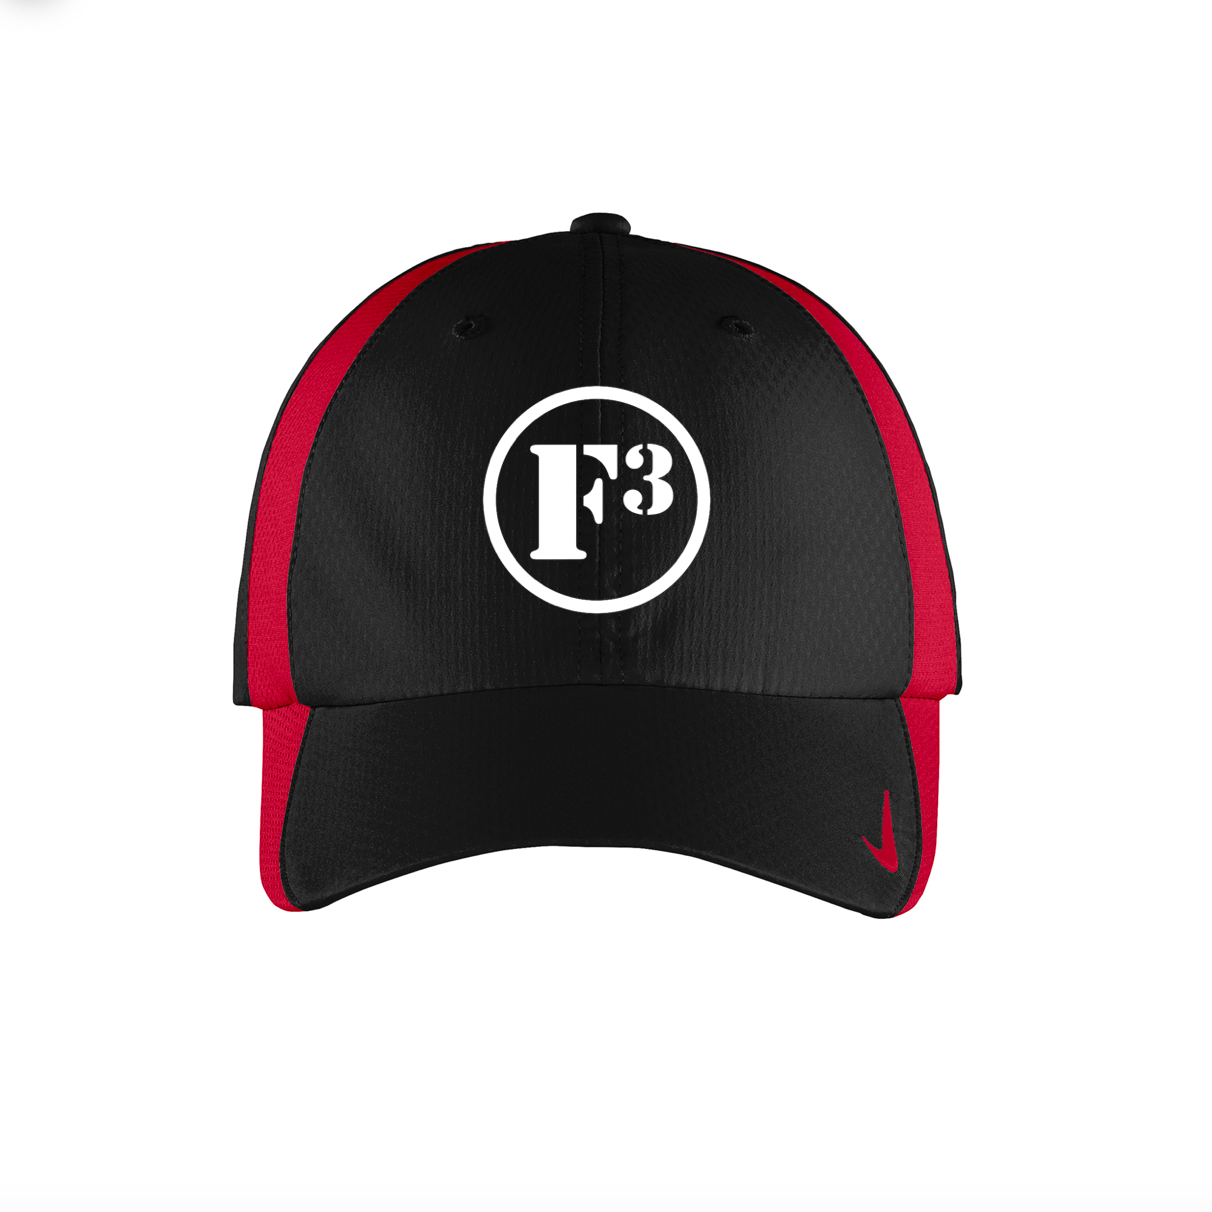 F3 Nike Sphere Performance Cap - Made to Order